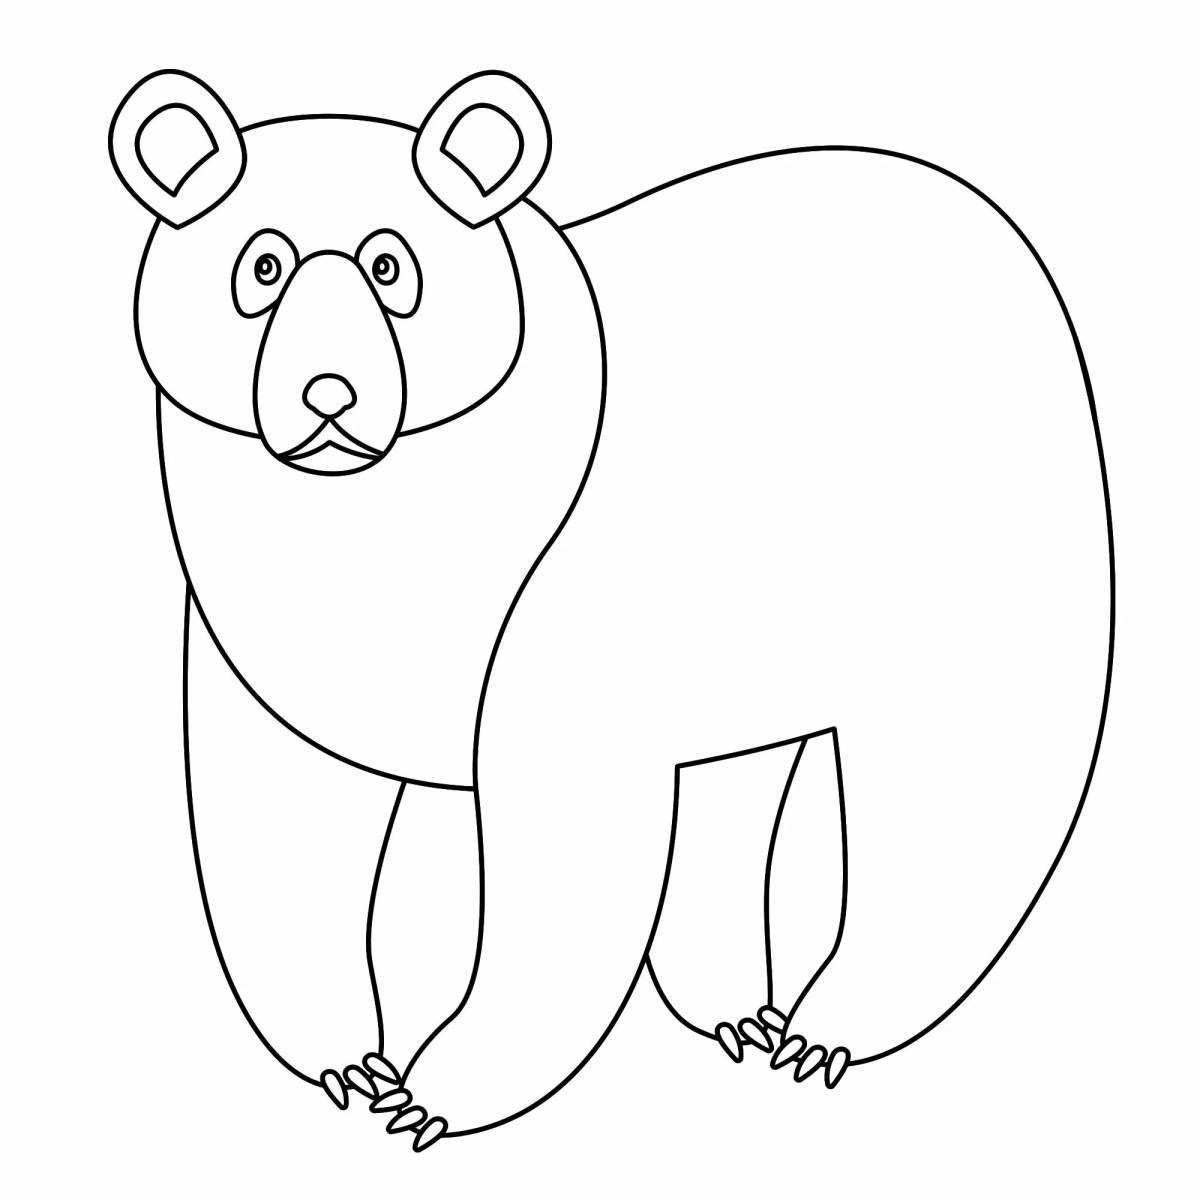 Sweet bear coloring page